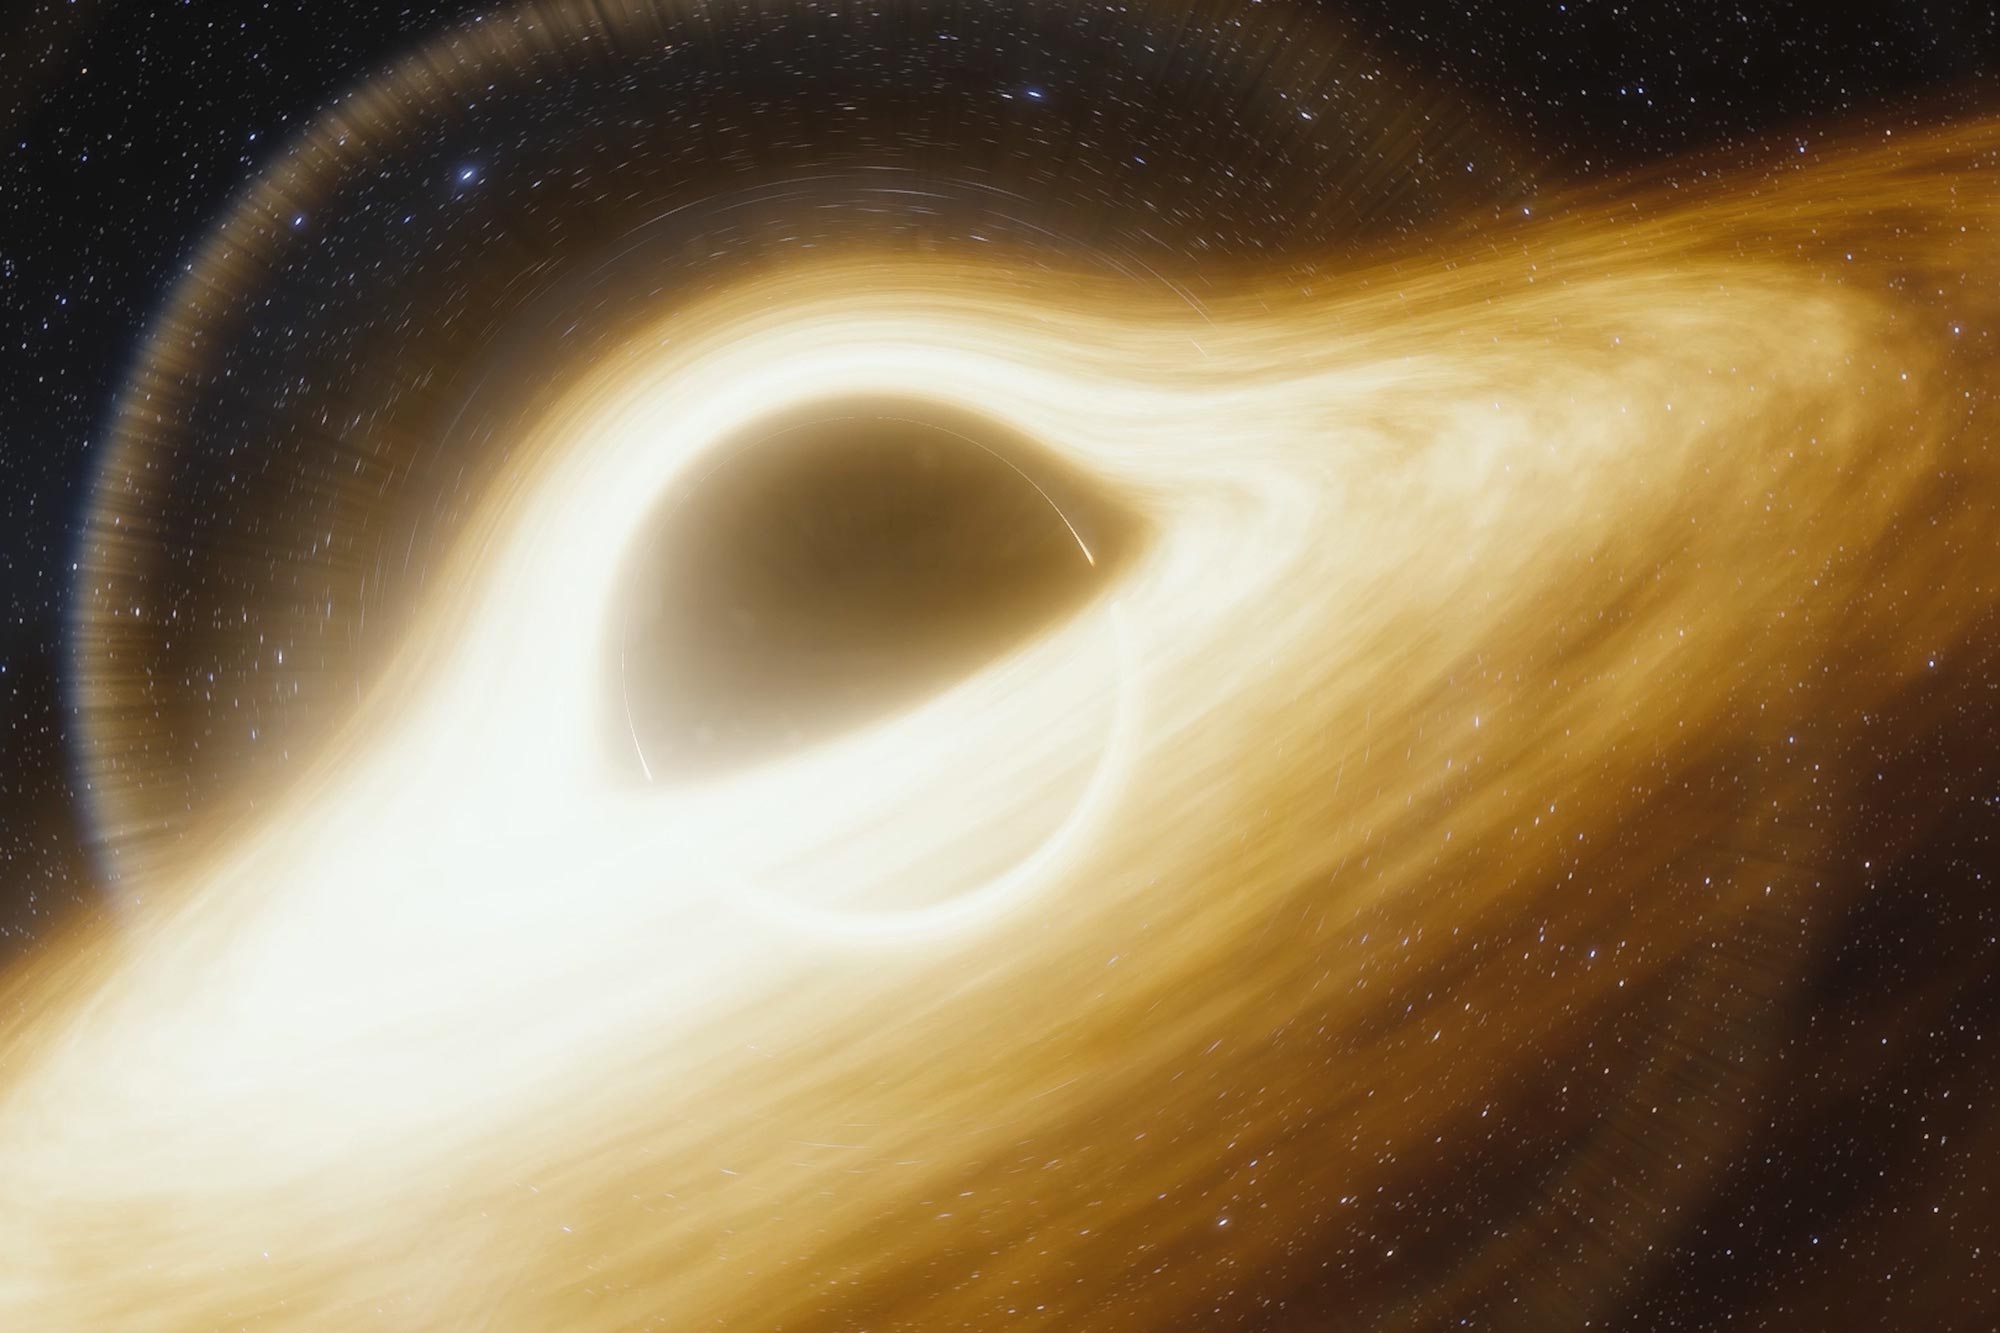 Strangely Massive Black Hole Discovered in Milky Way Satellite Galaxy - SciTechDaily